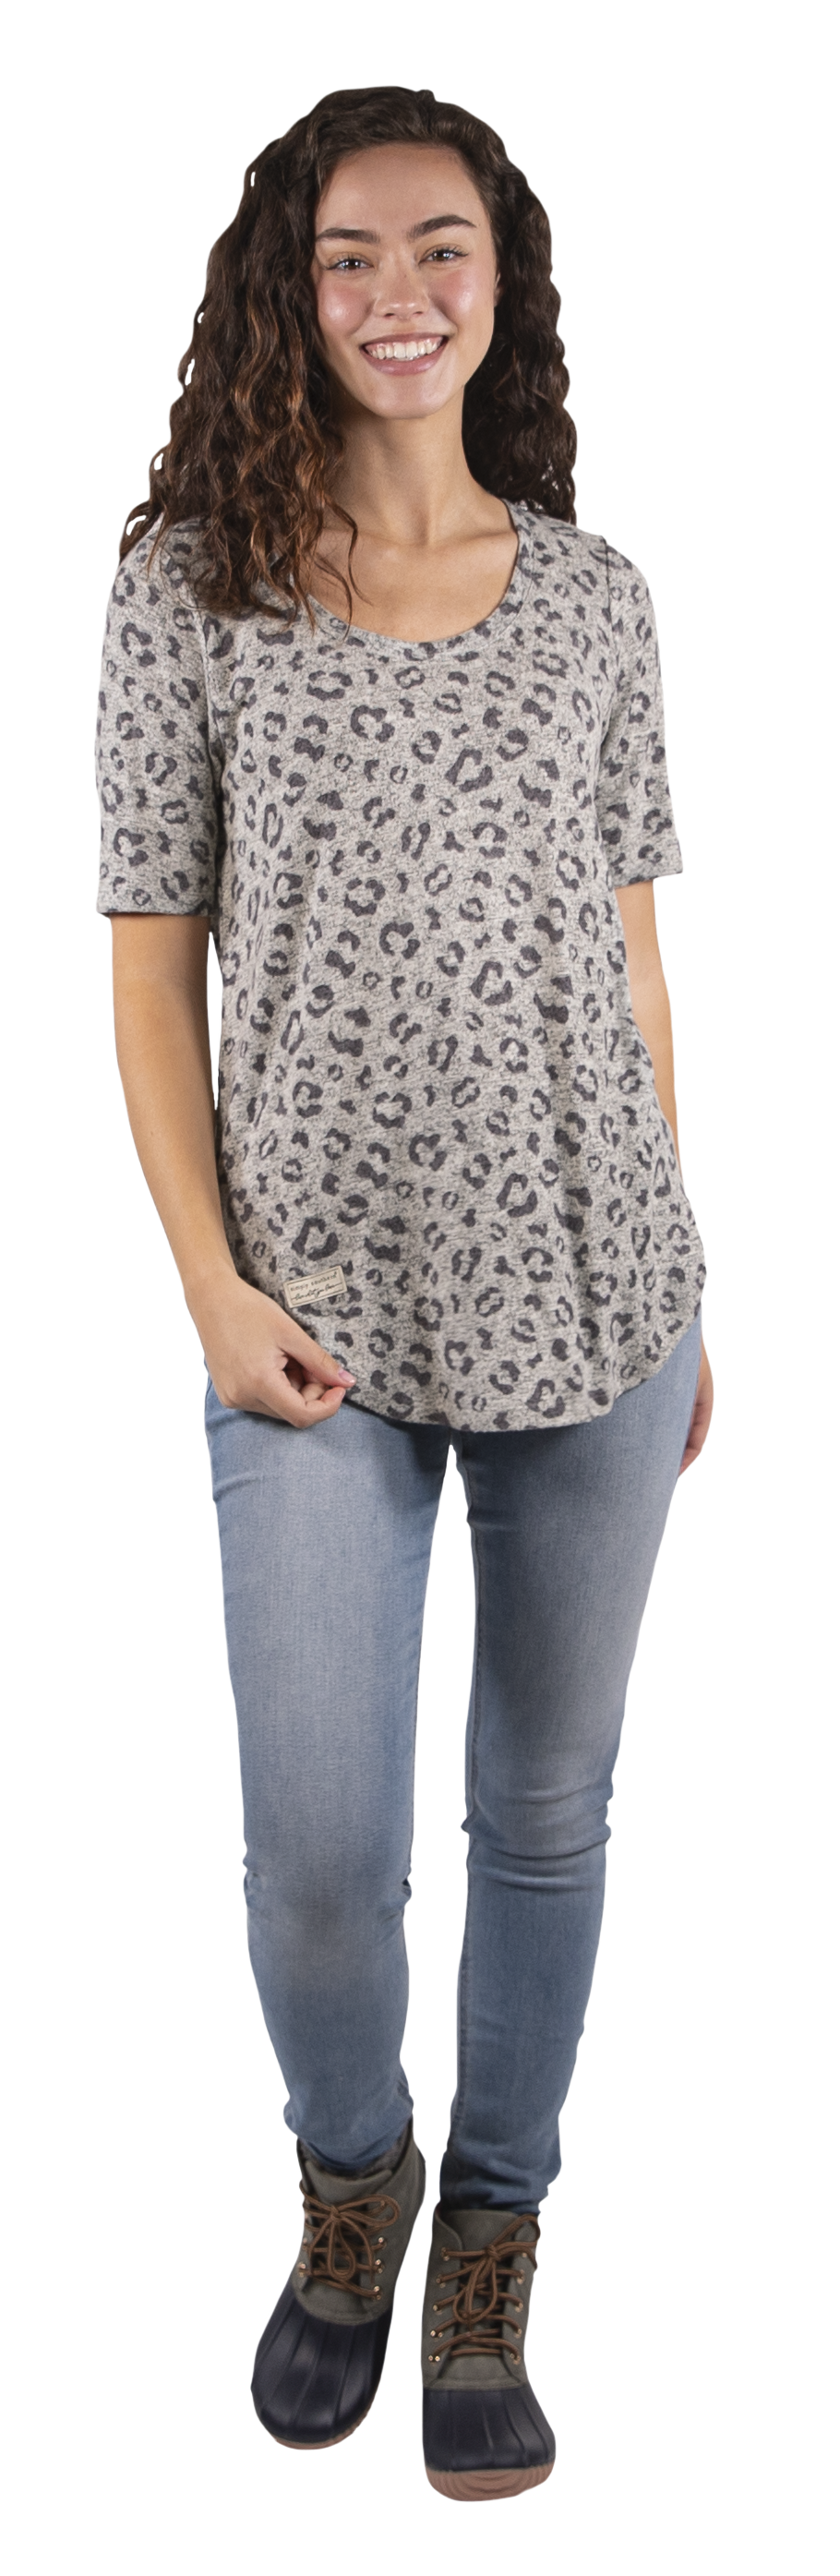 Leopard Knit Scoop Top by Simply Southern